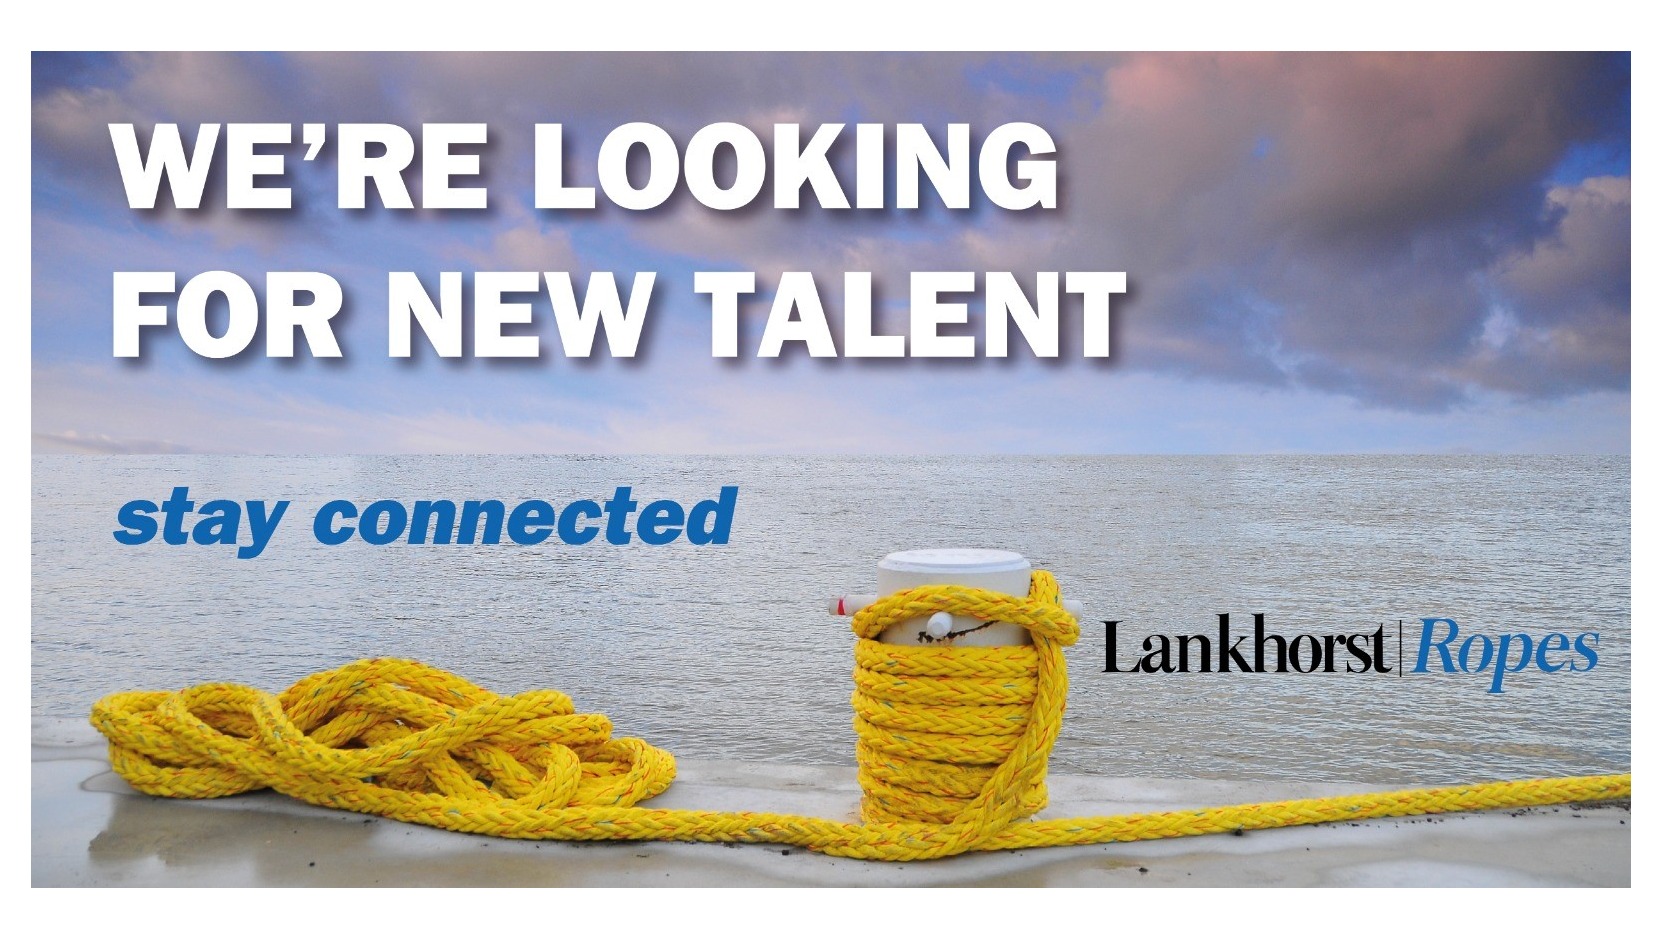 Looking-for-new-talent-at-Lankhorst-Ropes-3